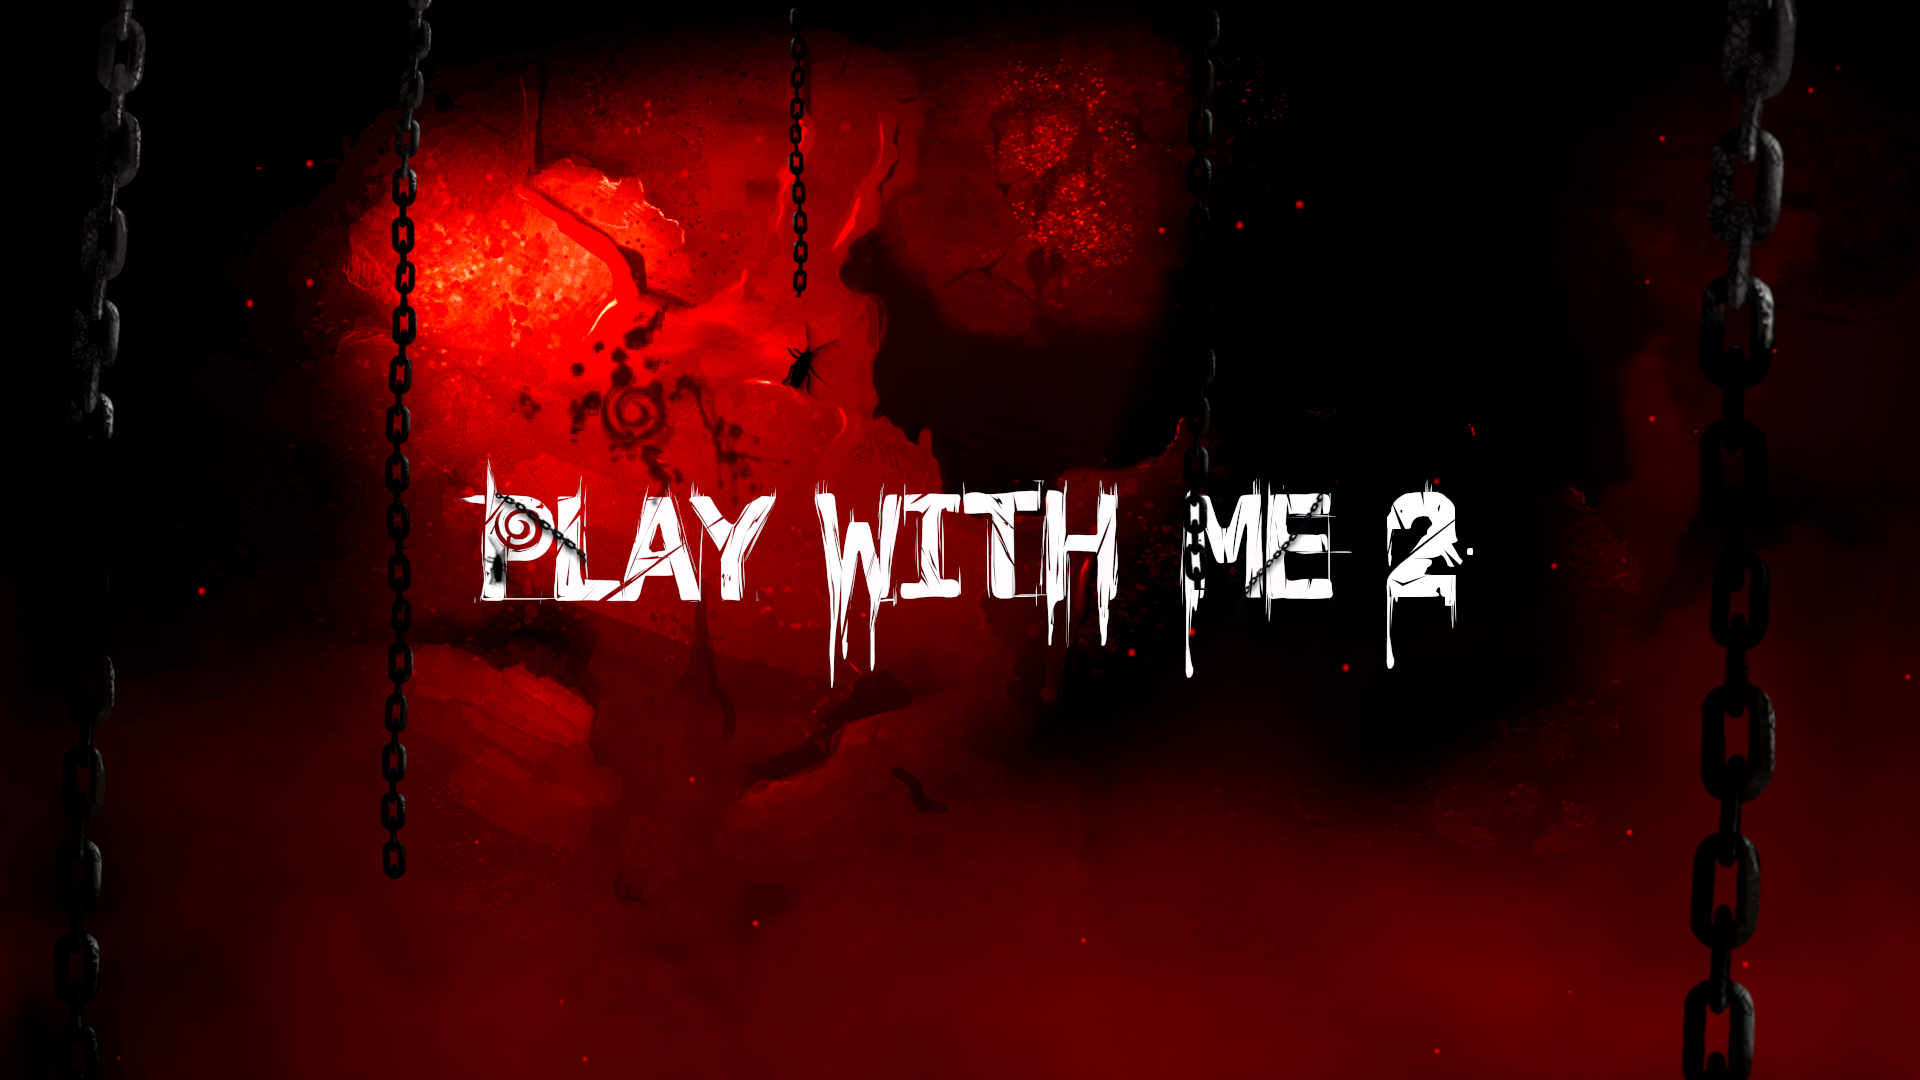 Play with Me 2: On the other side